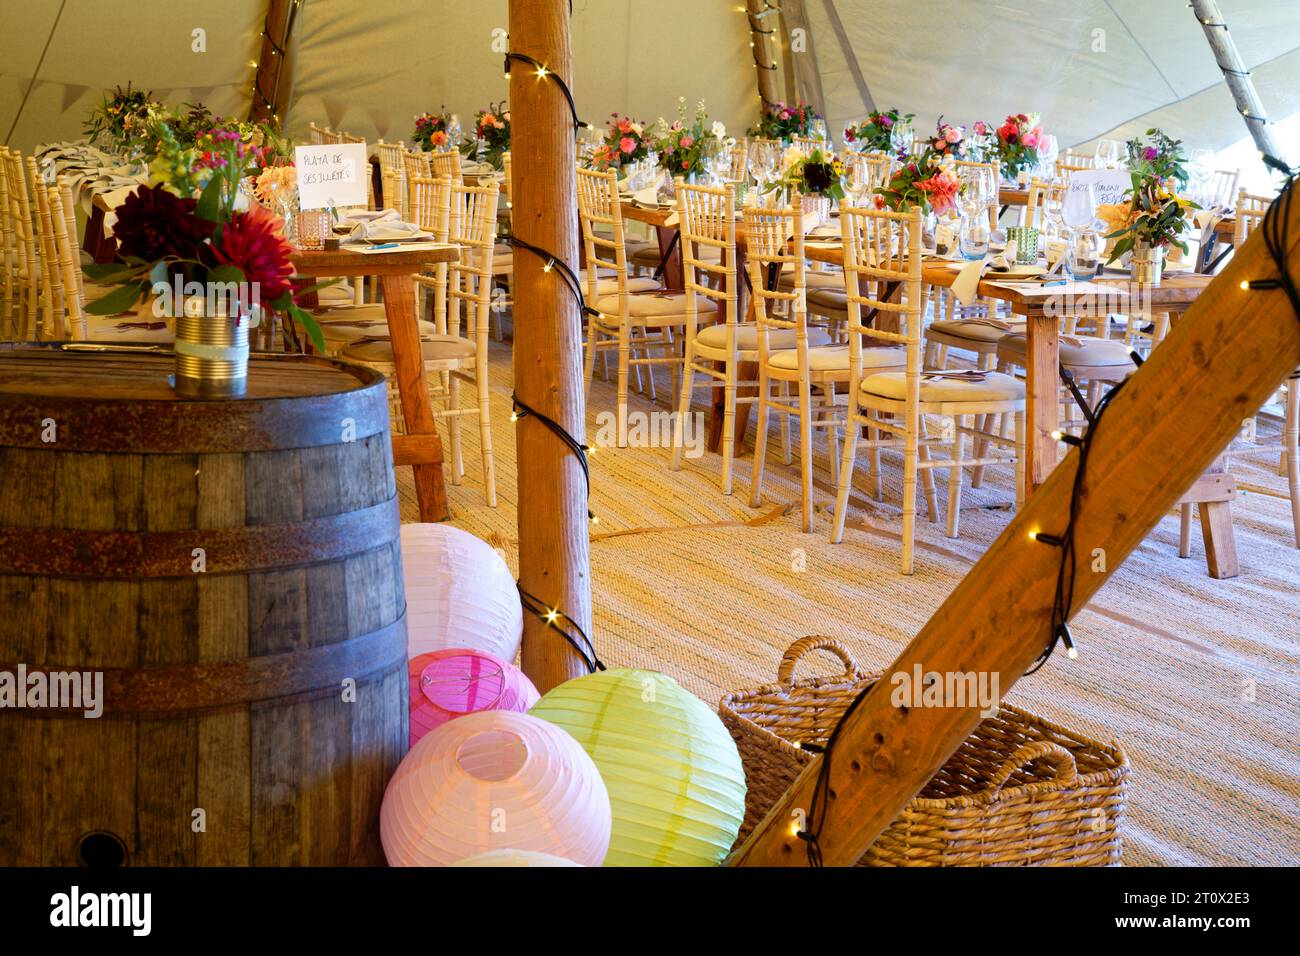 Wedding marquee decorated and ready for the guests to arrive. Tables, chairs, flowers and place settings. A rustic teepee design of tent. Stock Photo